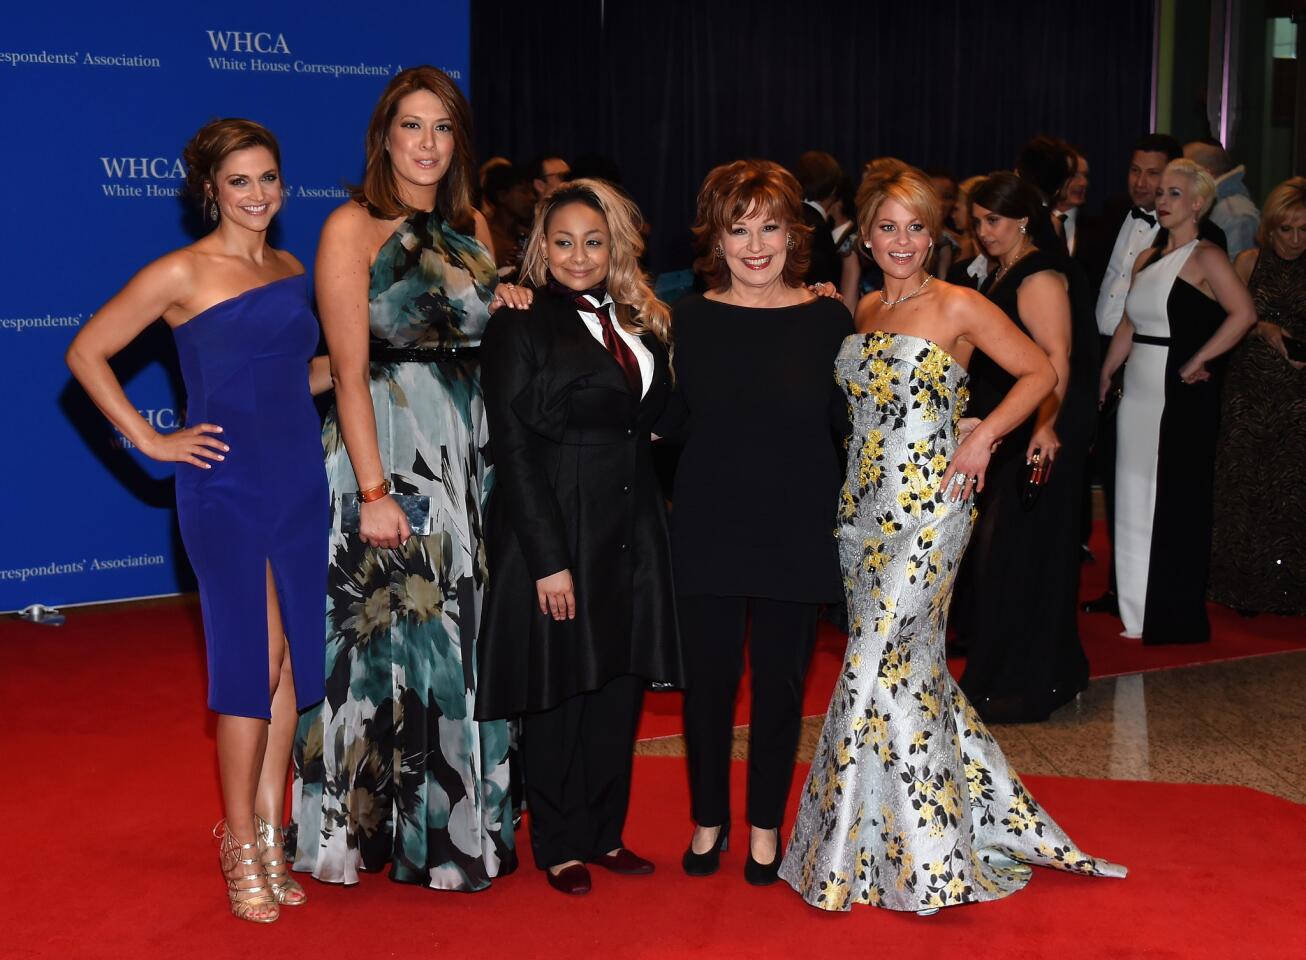 Cast of "The View"